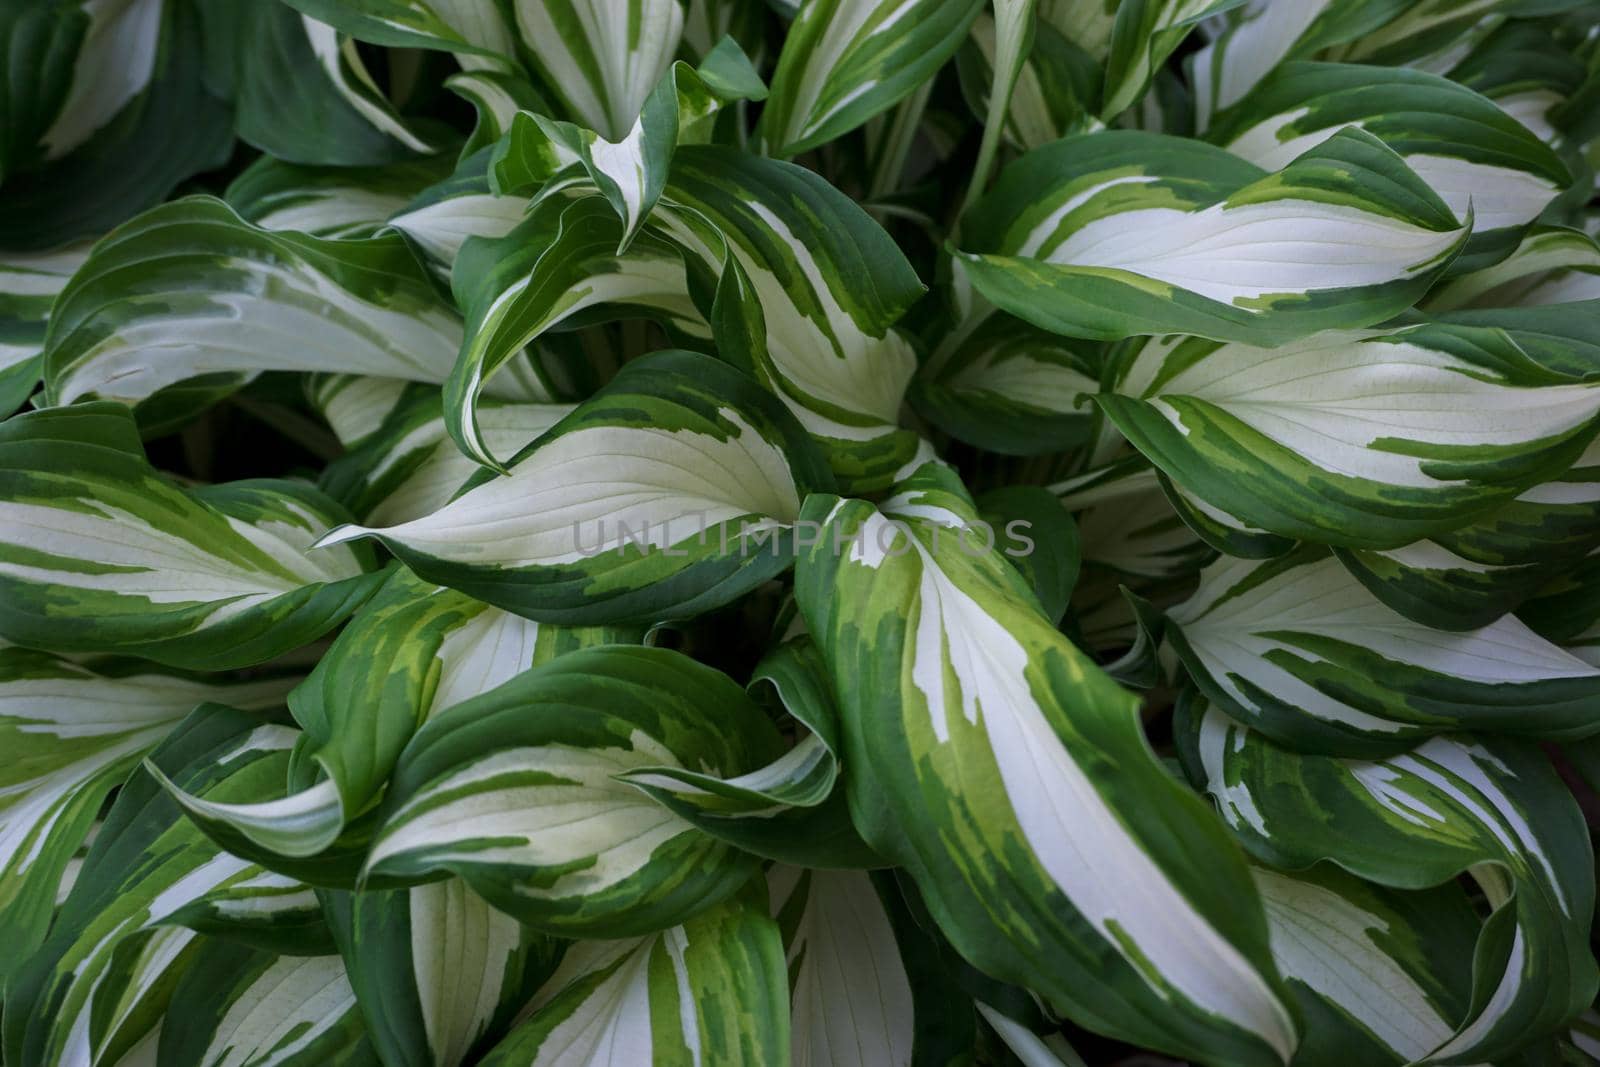 The white-green leaves of the hosts are taken in close-up by Spirina